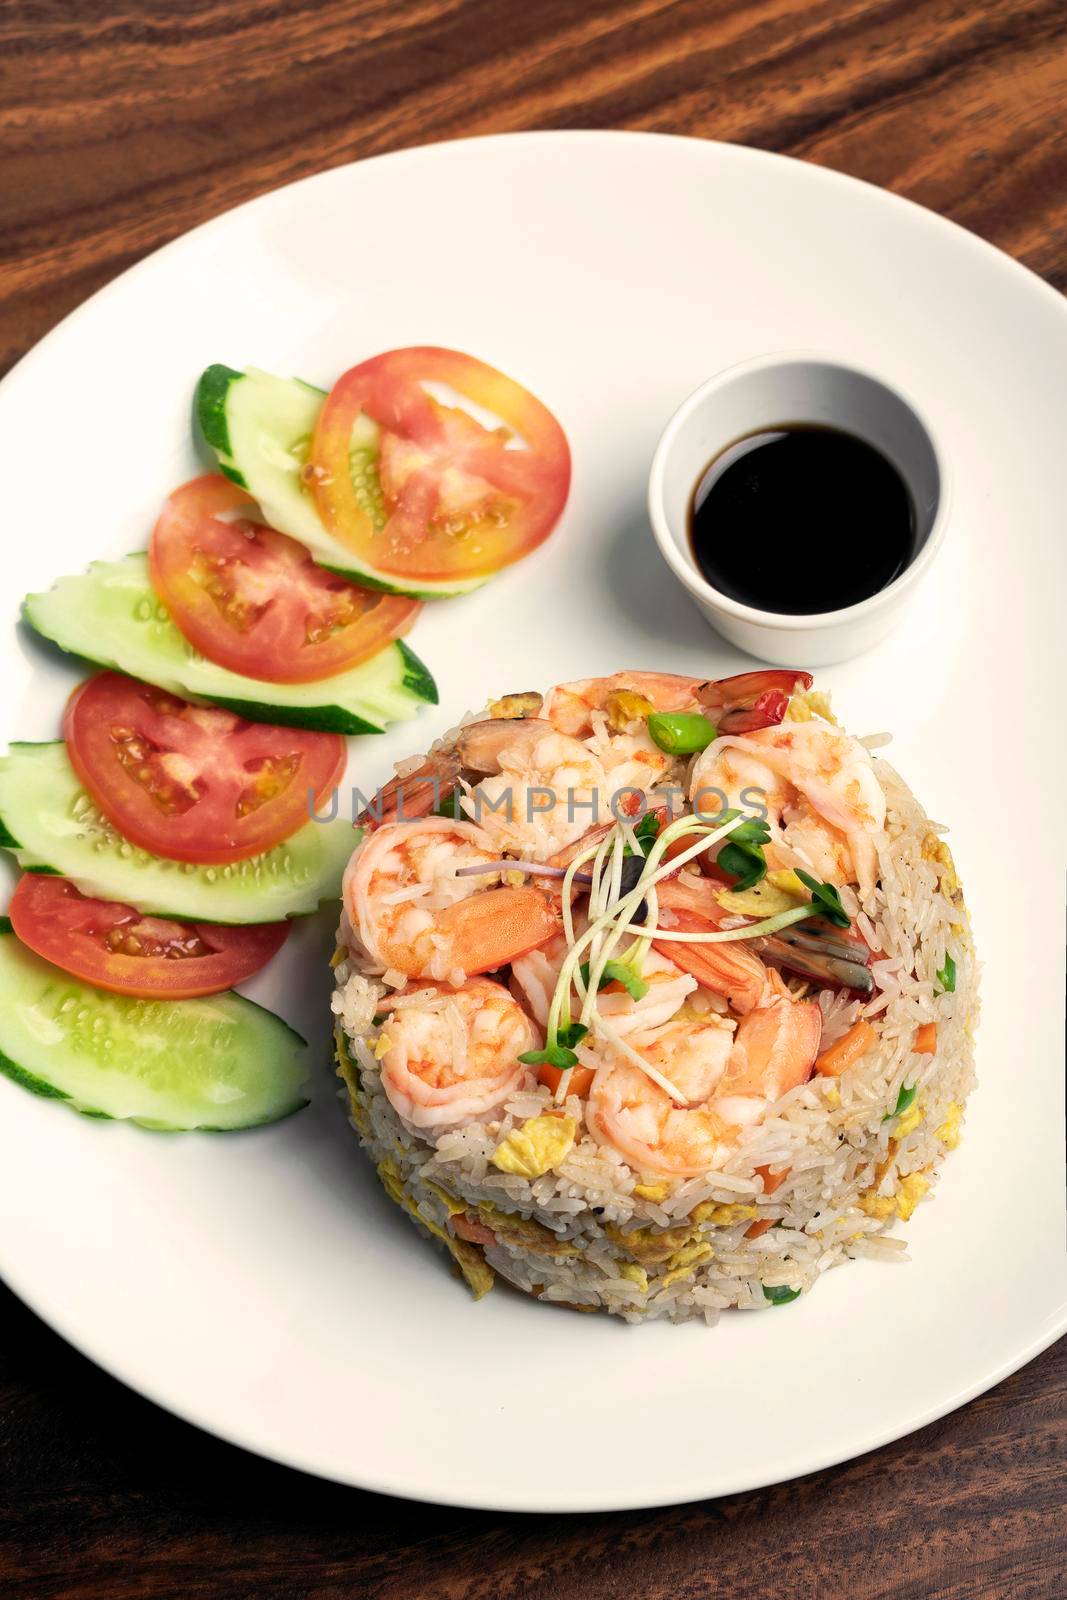 thai shrimp seafood fried rice traditional meal in bangkok restaurant thailand